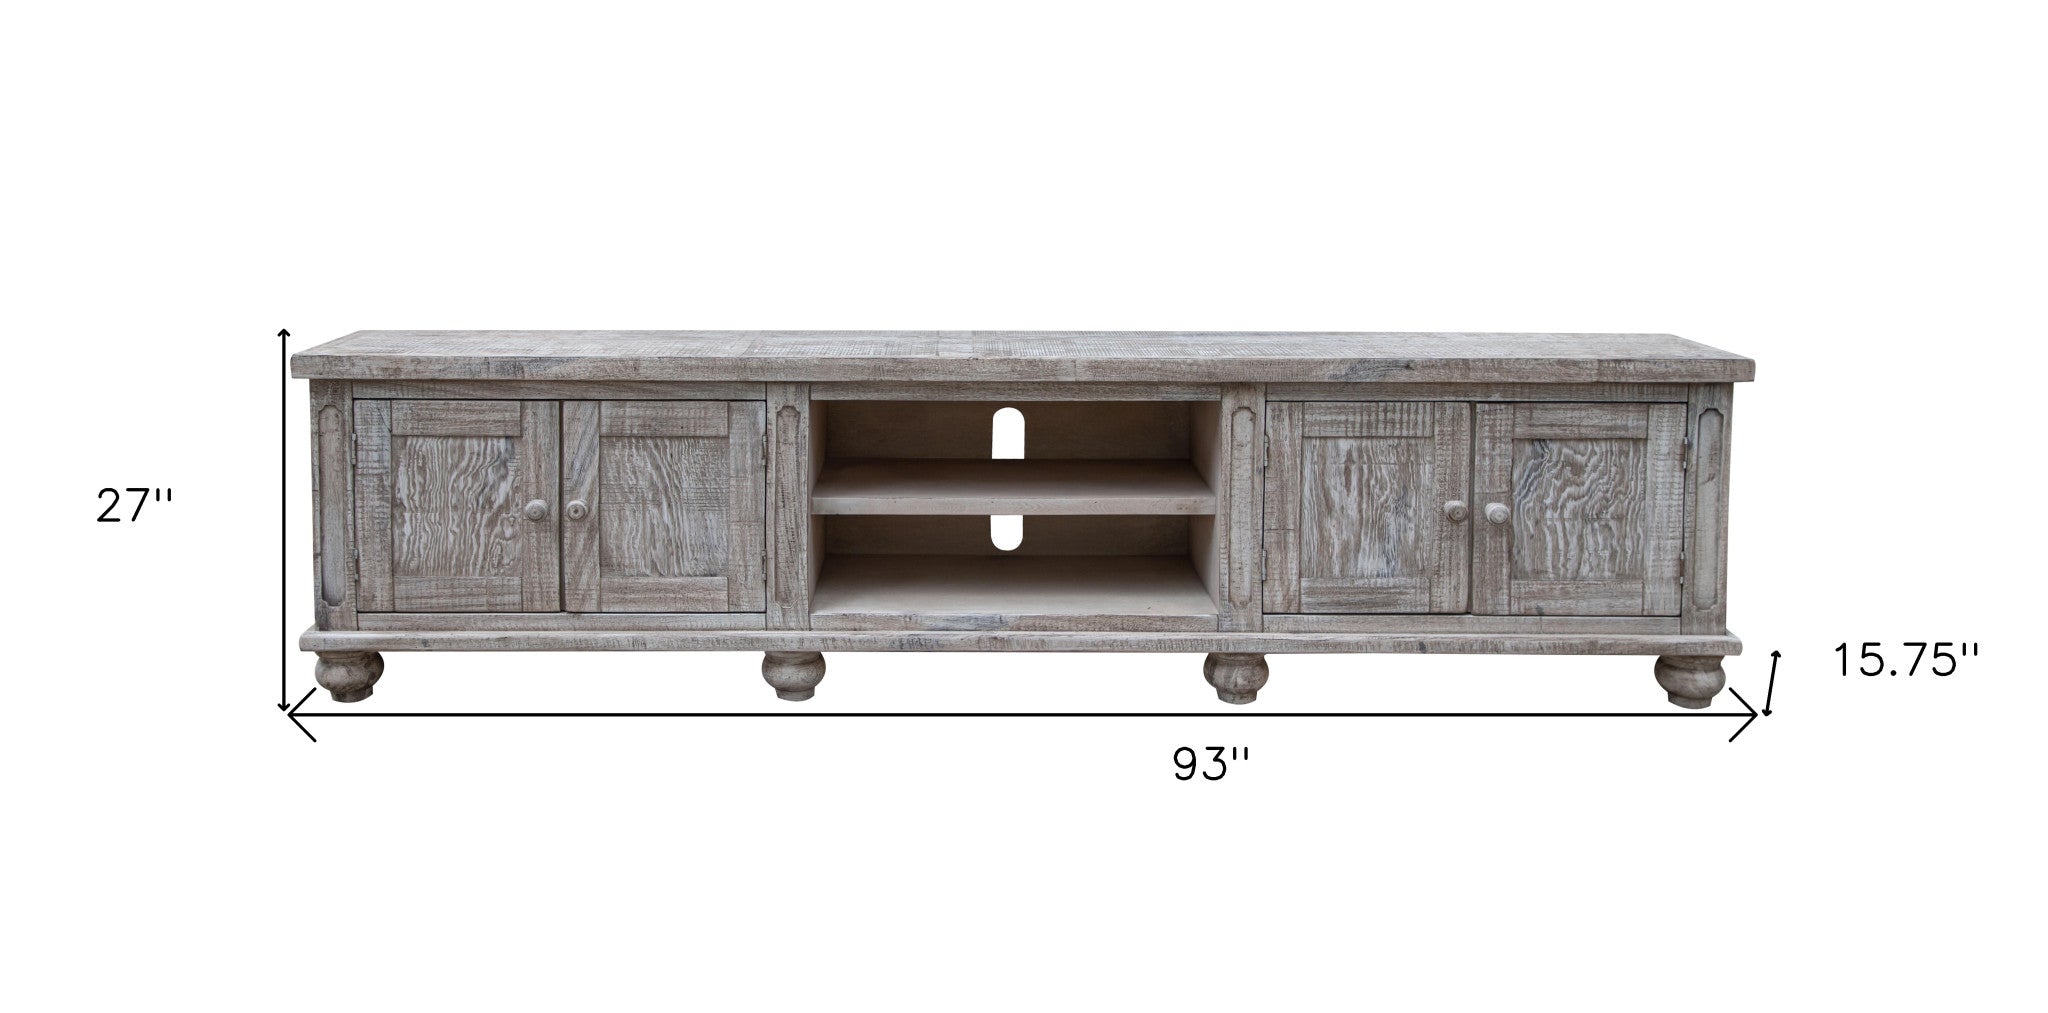 93" Desert Sand Solid Wood Cabinet Enclosed Storage Distressed TV Stand